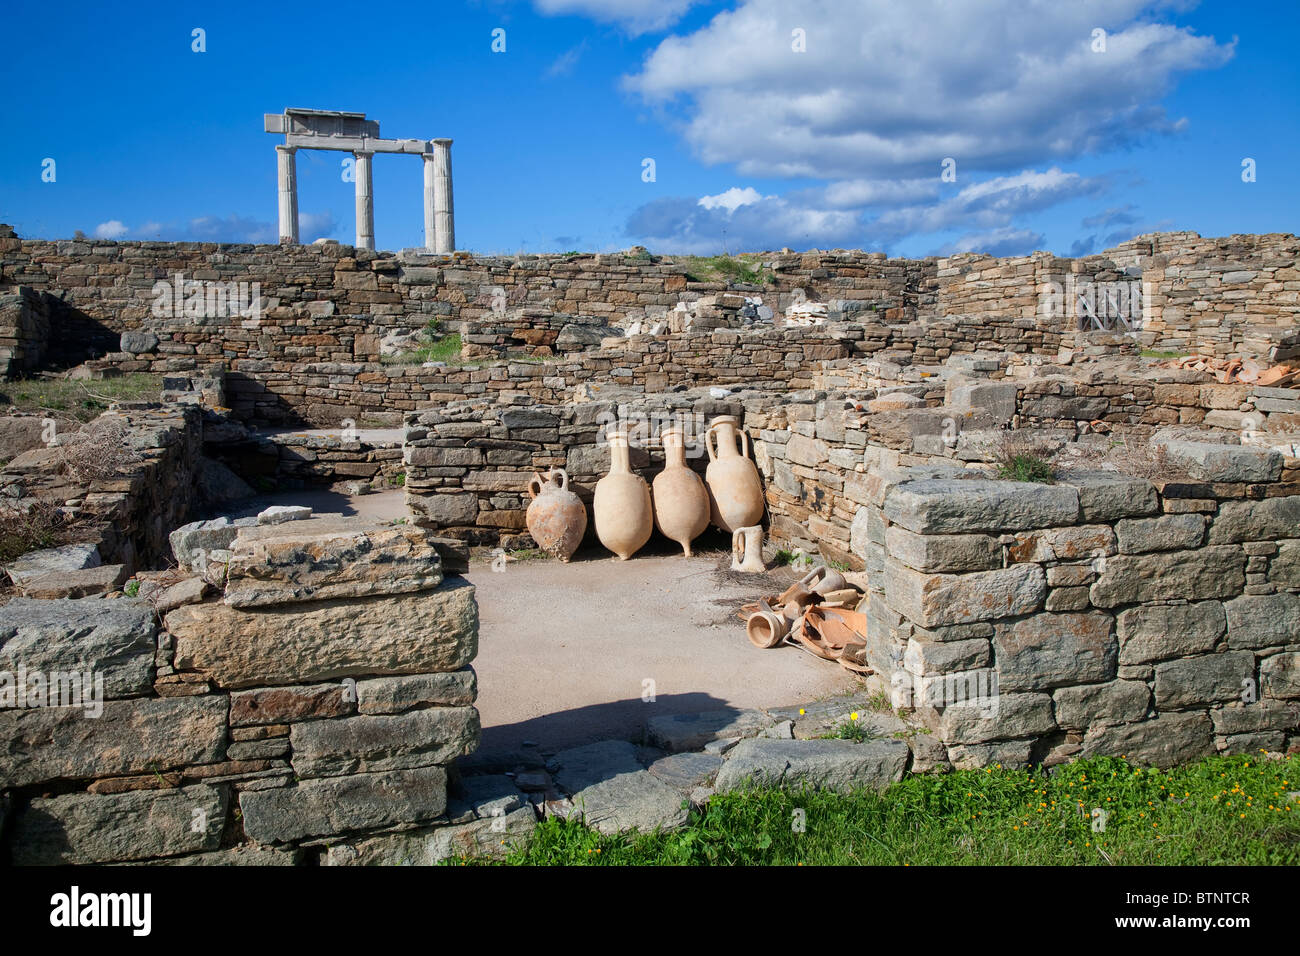 Ancient pottery wine amphora found in the ruins on the island of Delos, Greece. Stock Photo